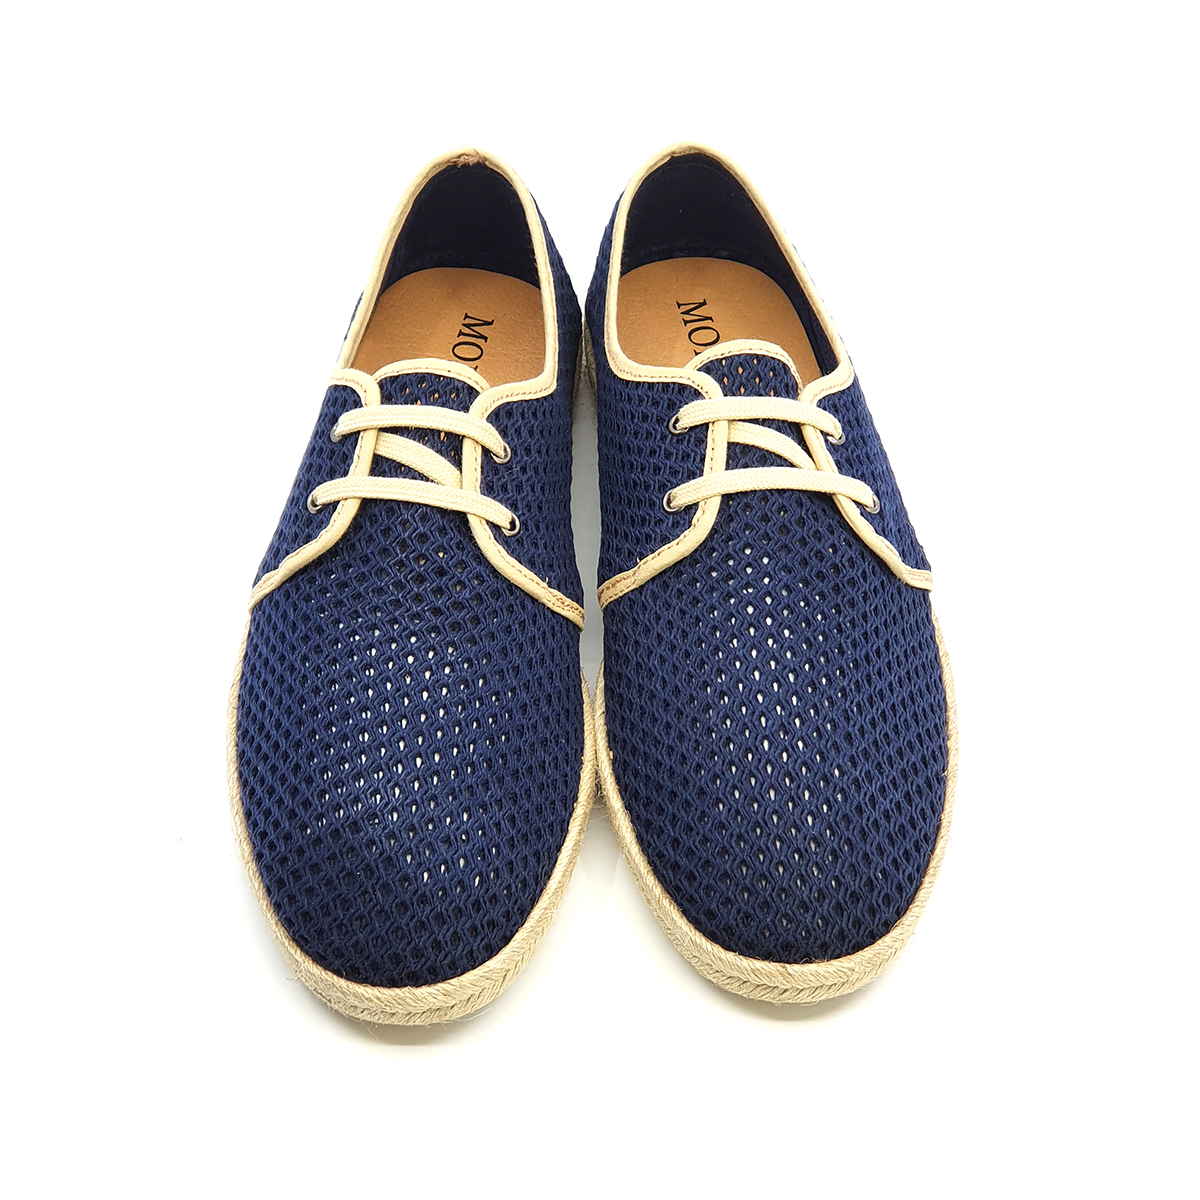 The Paulo In Navy & Cream Piping Canvas – Summer Shoes – Mod Shoes